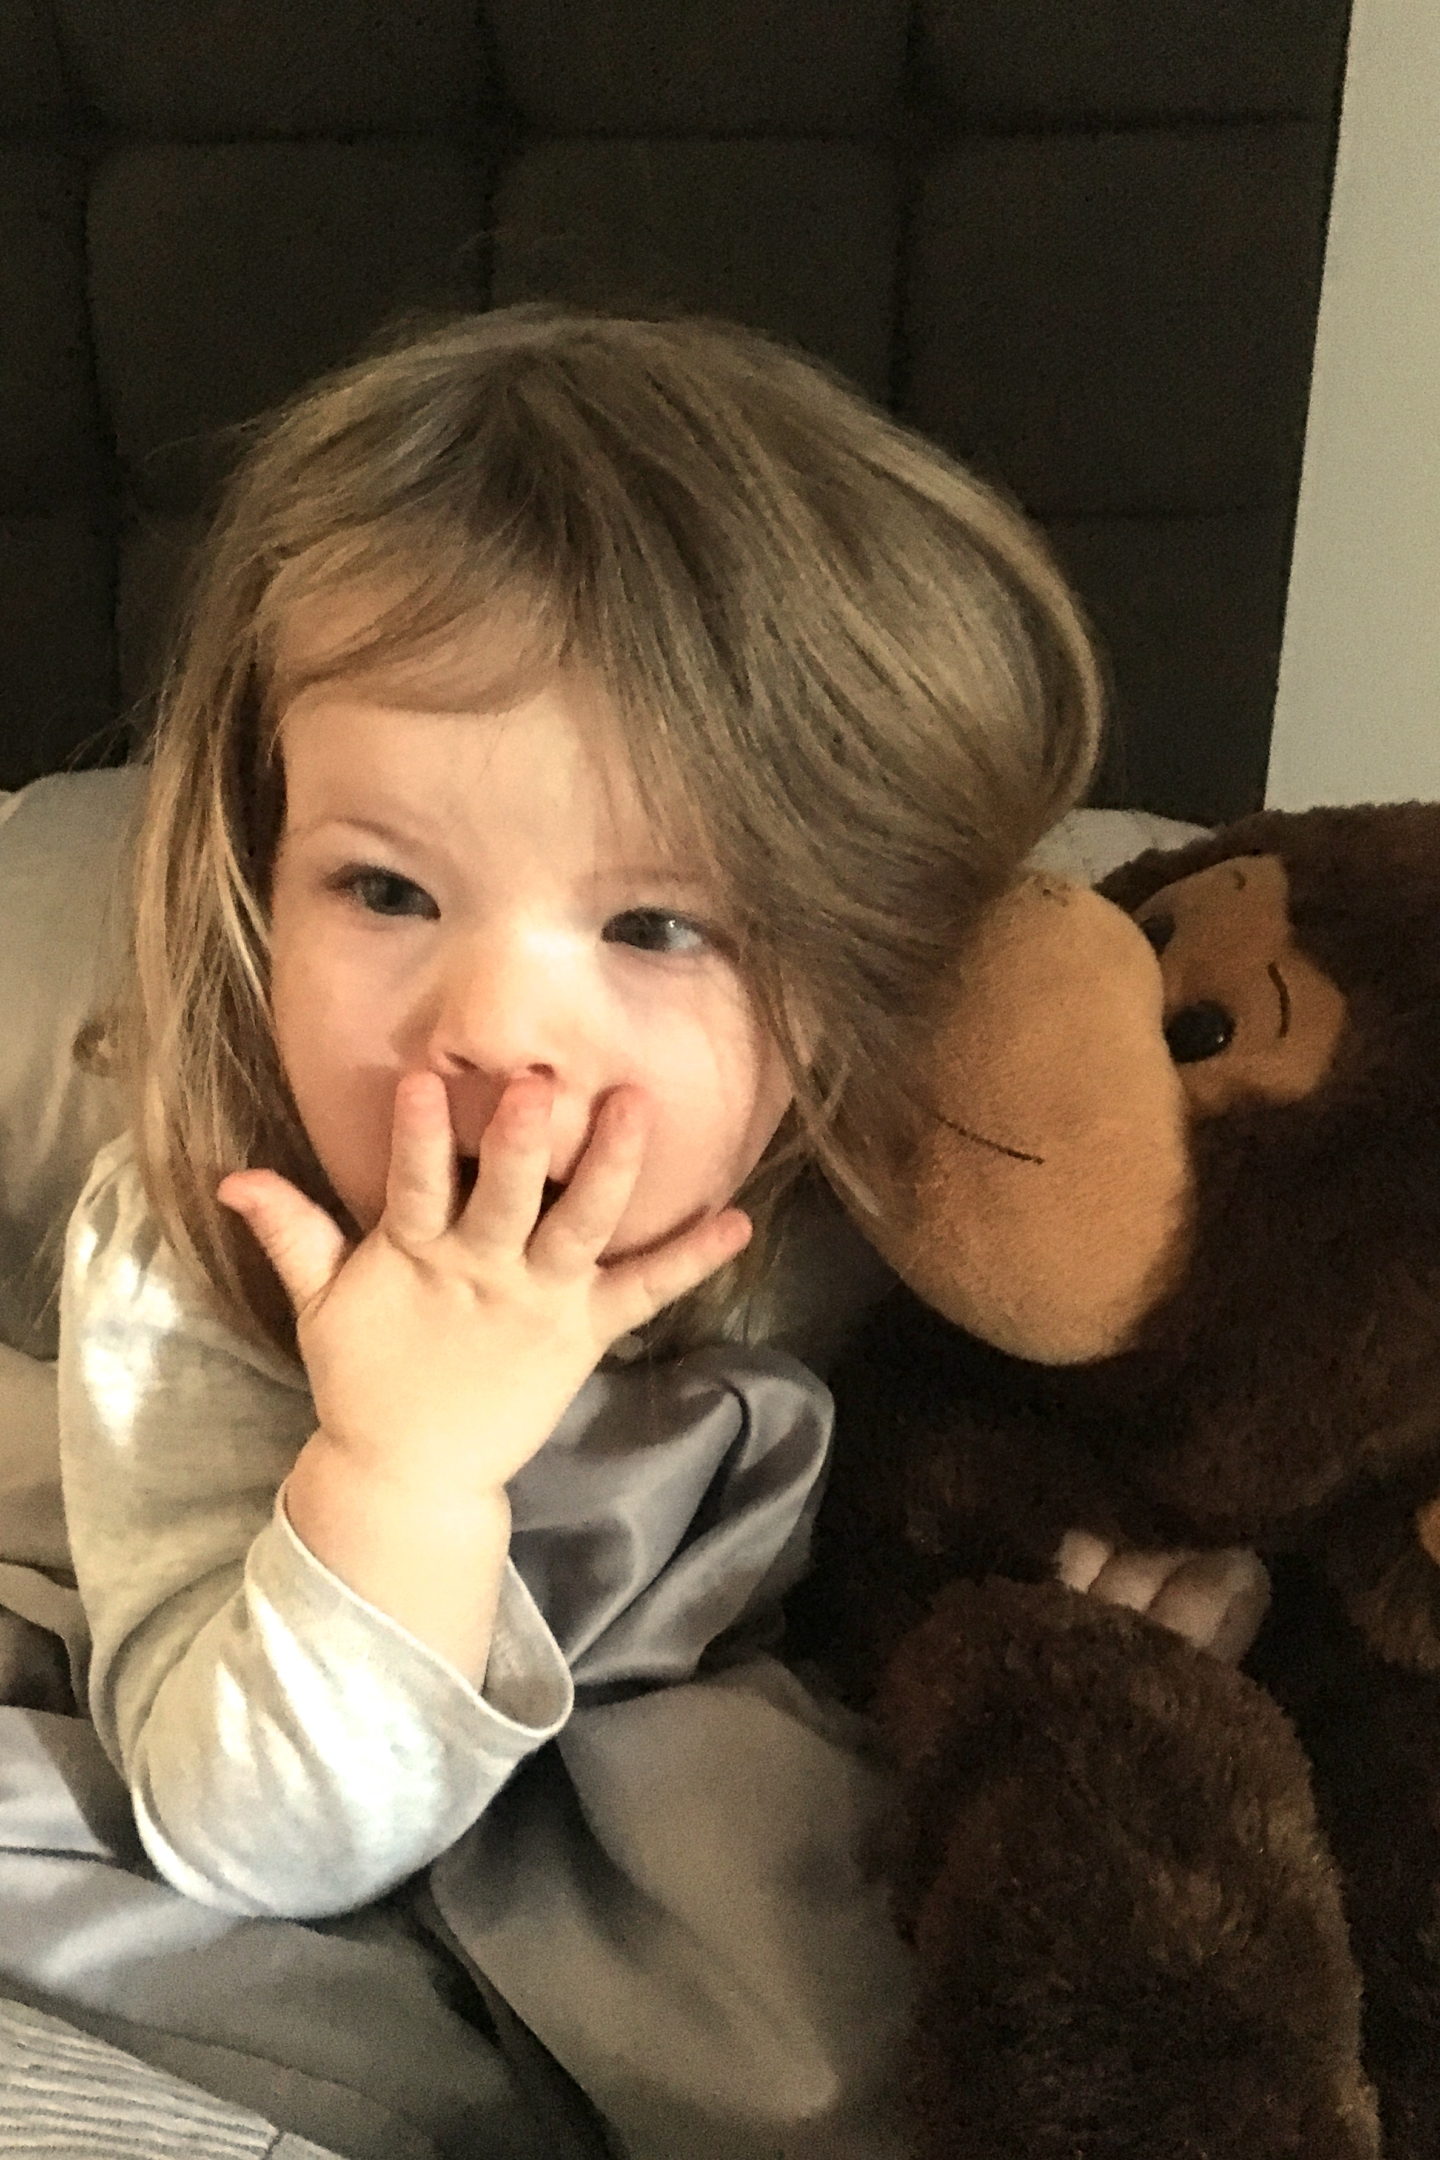 toddler in bed with cuddly monkey, looking surprised with hand over her mouth